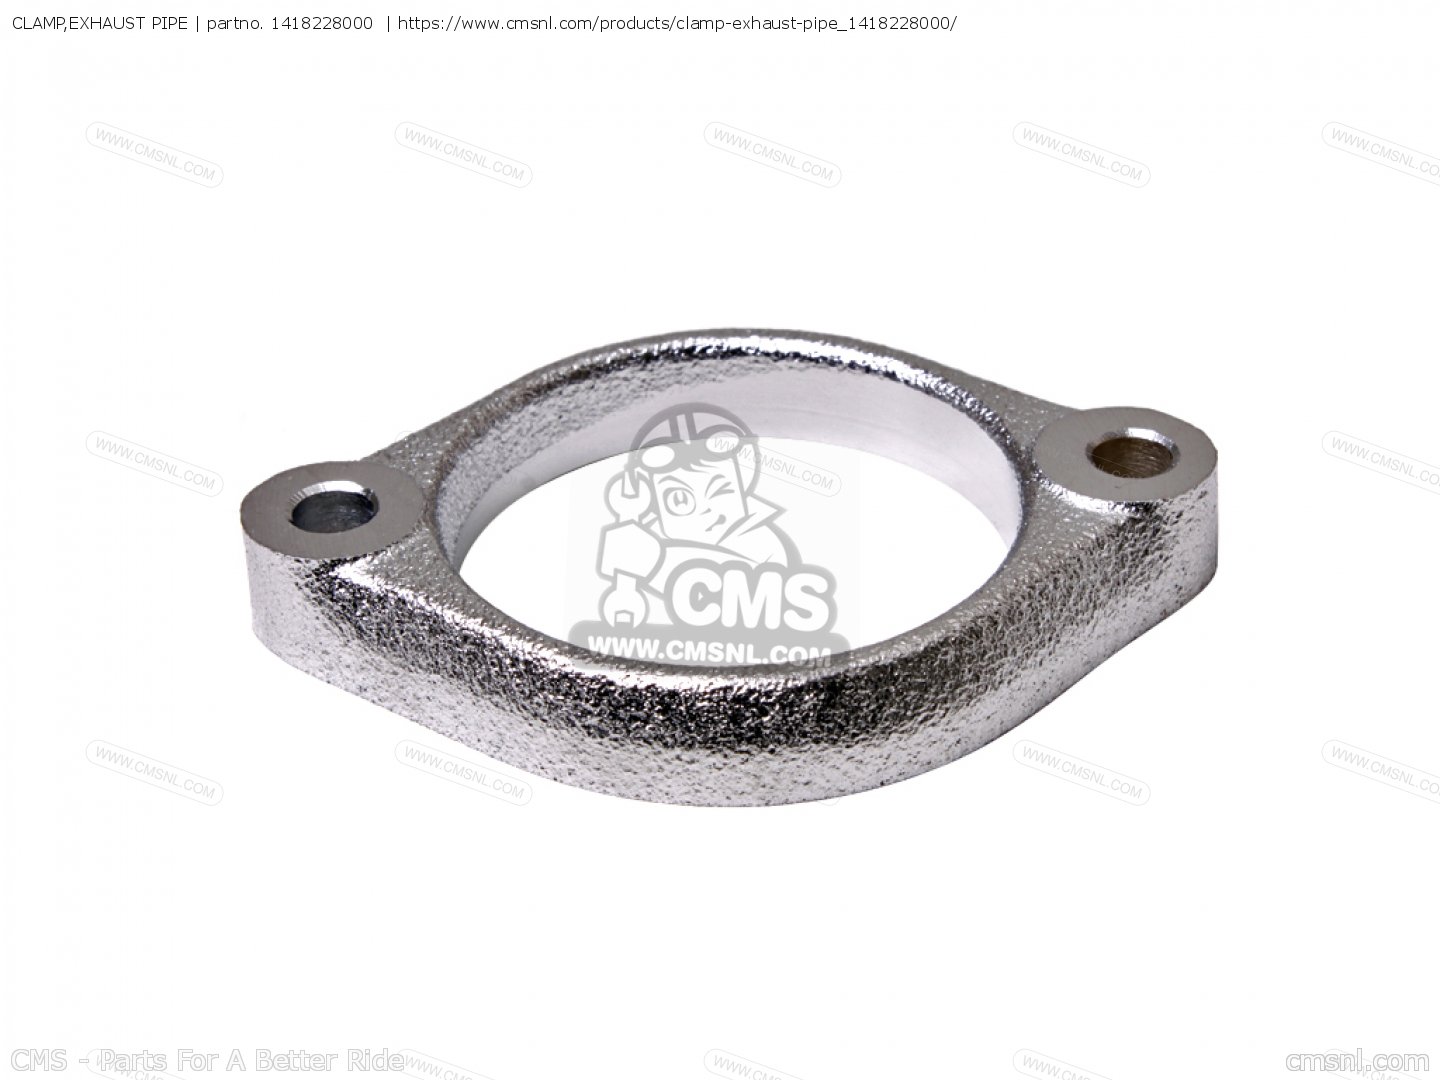 CLAMP,EXHAUST PIPE for TS185 1973 (K) USA (E03) - order at CMSNL